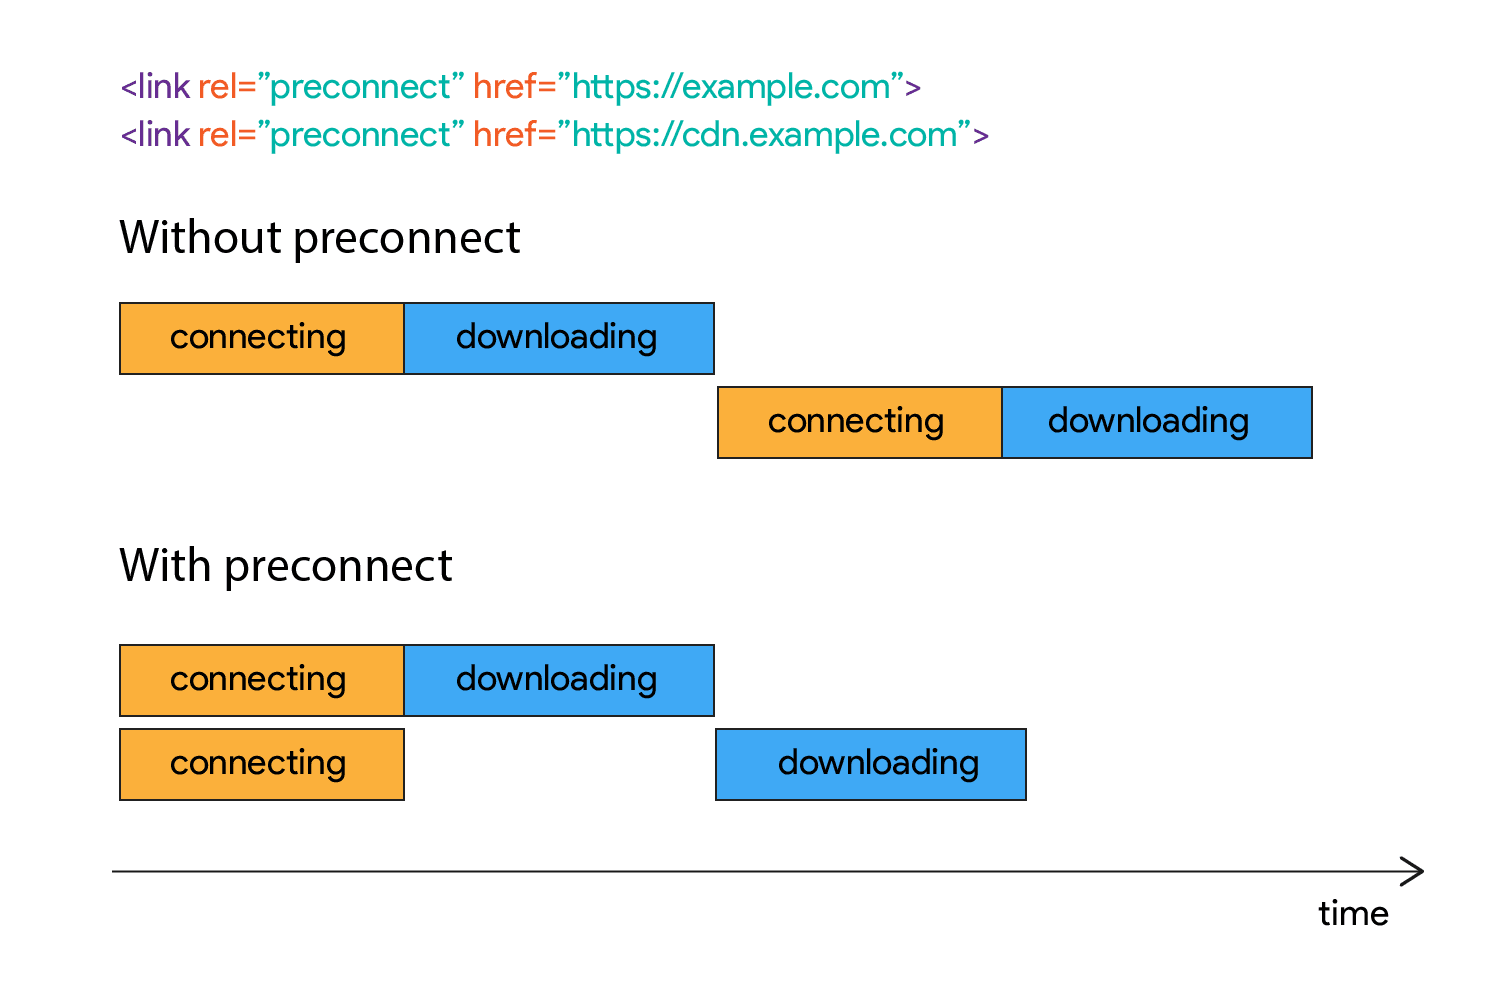 Using rel=”preconnect” to establish network connections early and increase performance